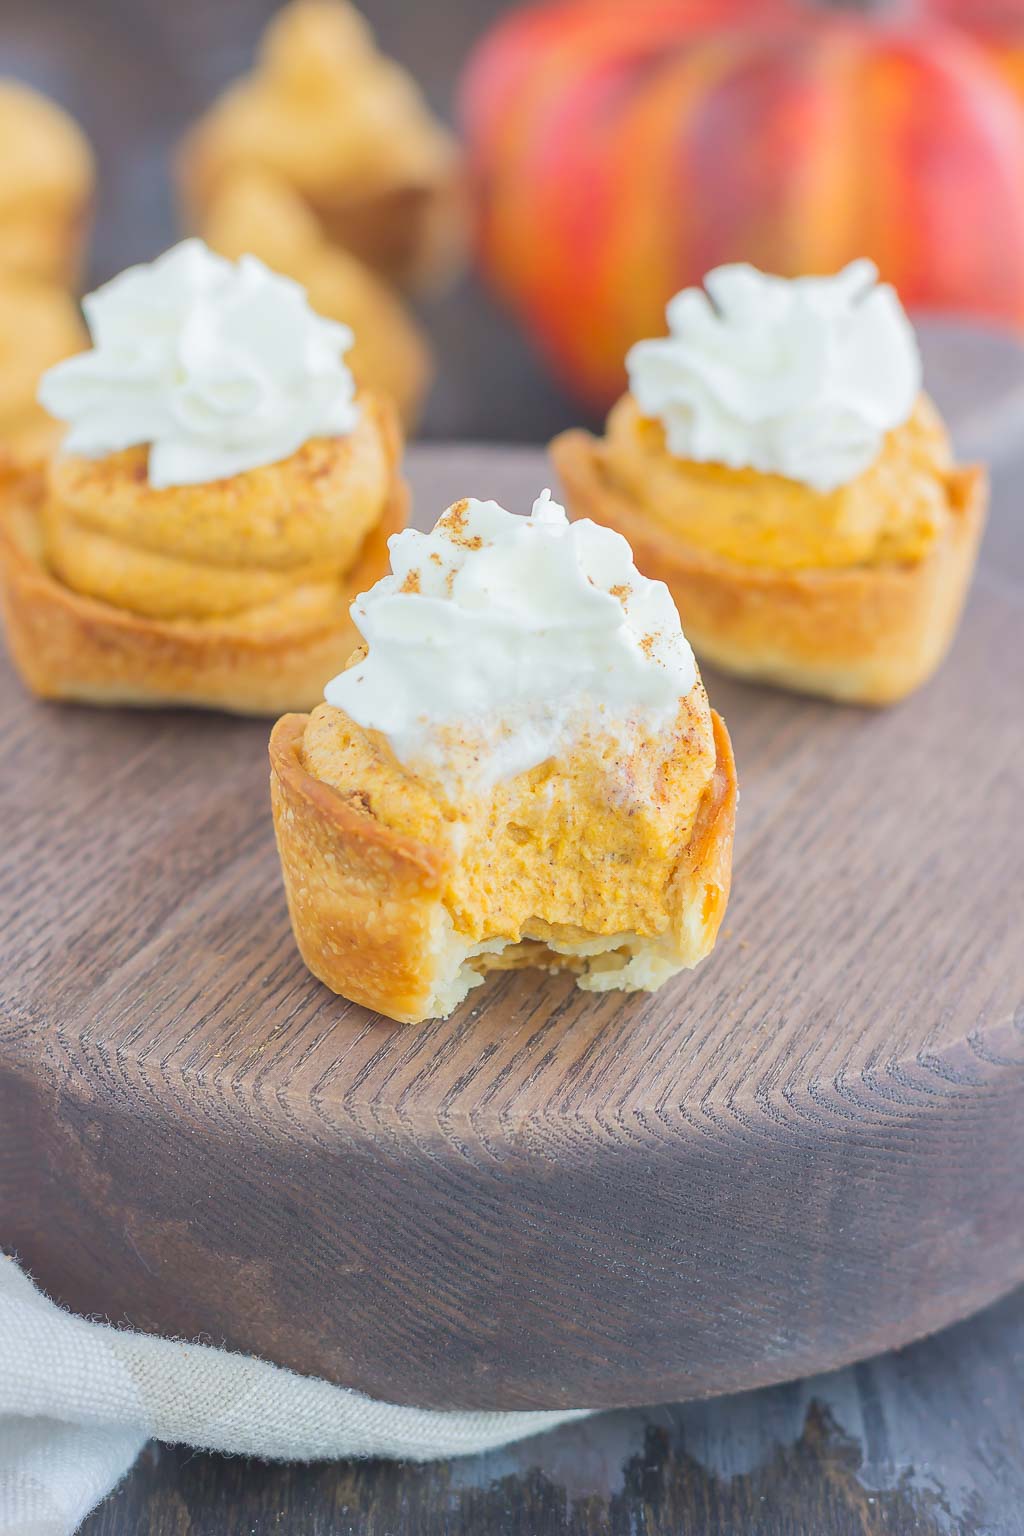 These Whipped Pumpkin Pie Bites are perfectly portable, poppable, and so easy to make. With just a few ingredients and hardly any prep time, you can have your pumpkin pie in bite-sized form! #pumpkin #pumpkinpie #pumpkinpiebites #pumpkinbites #piebites #pumpkinrecipe #fallrecipes #falldessert #pumpkindessert #dessert